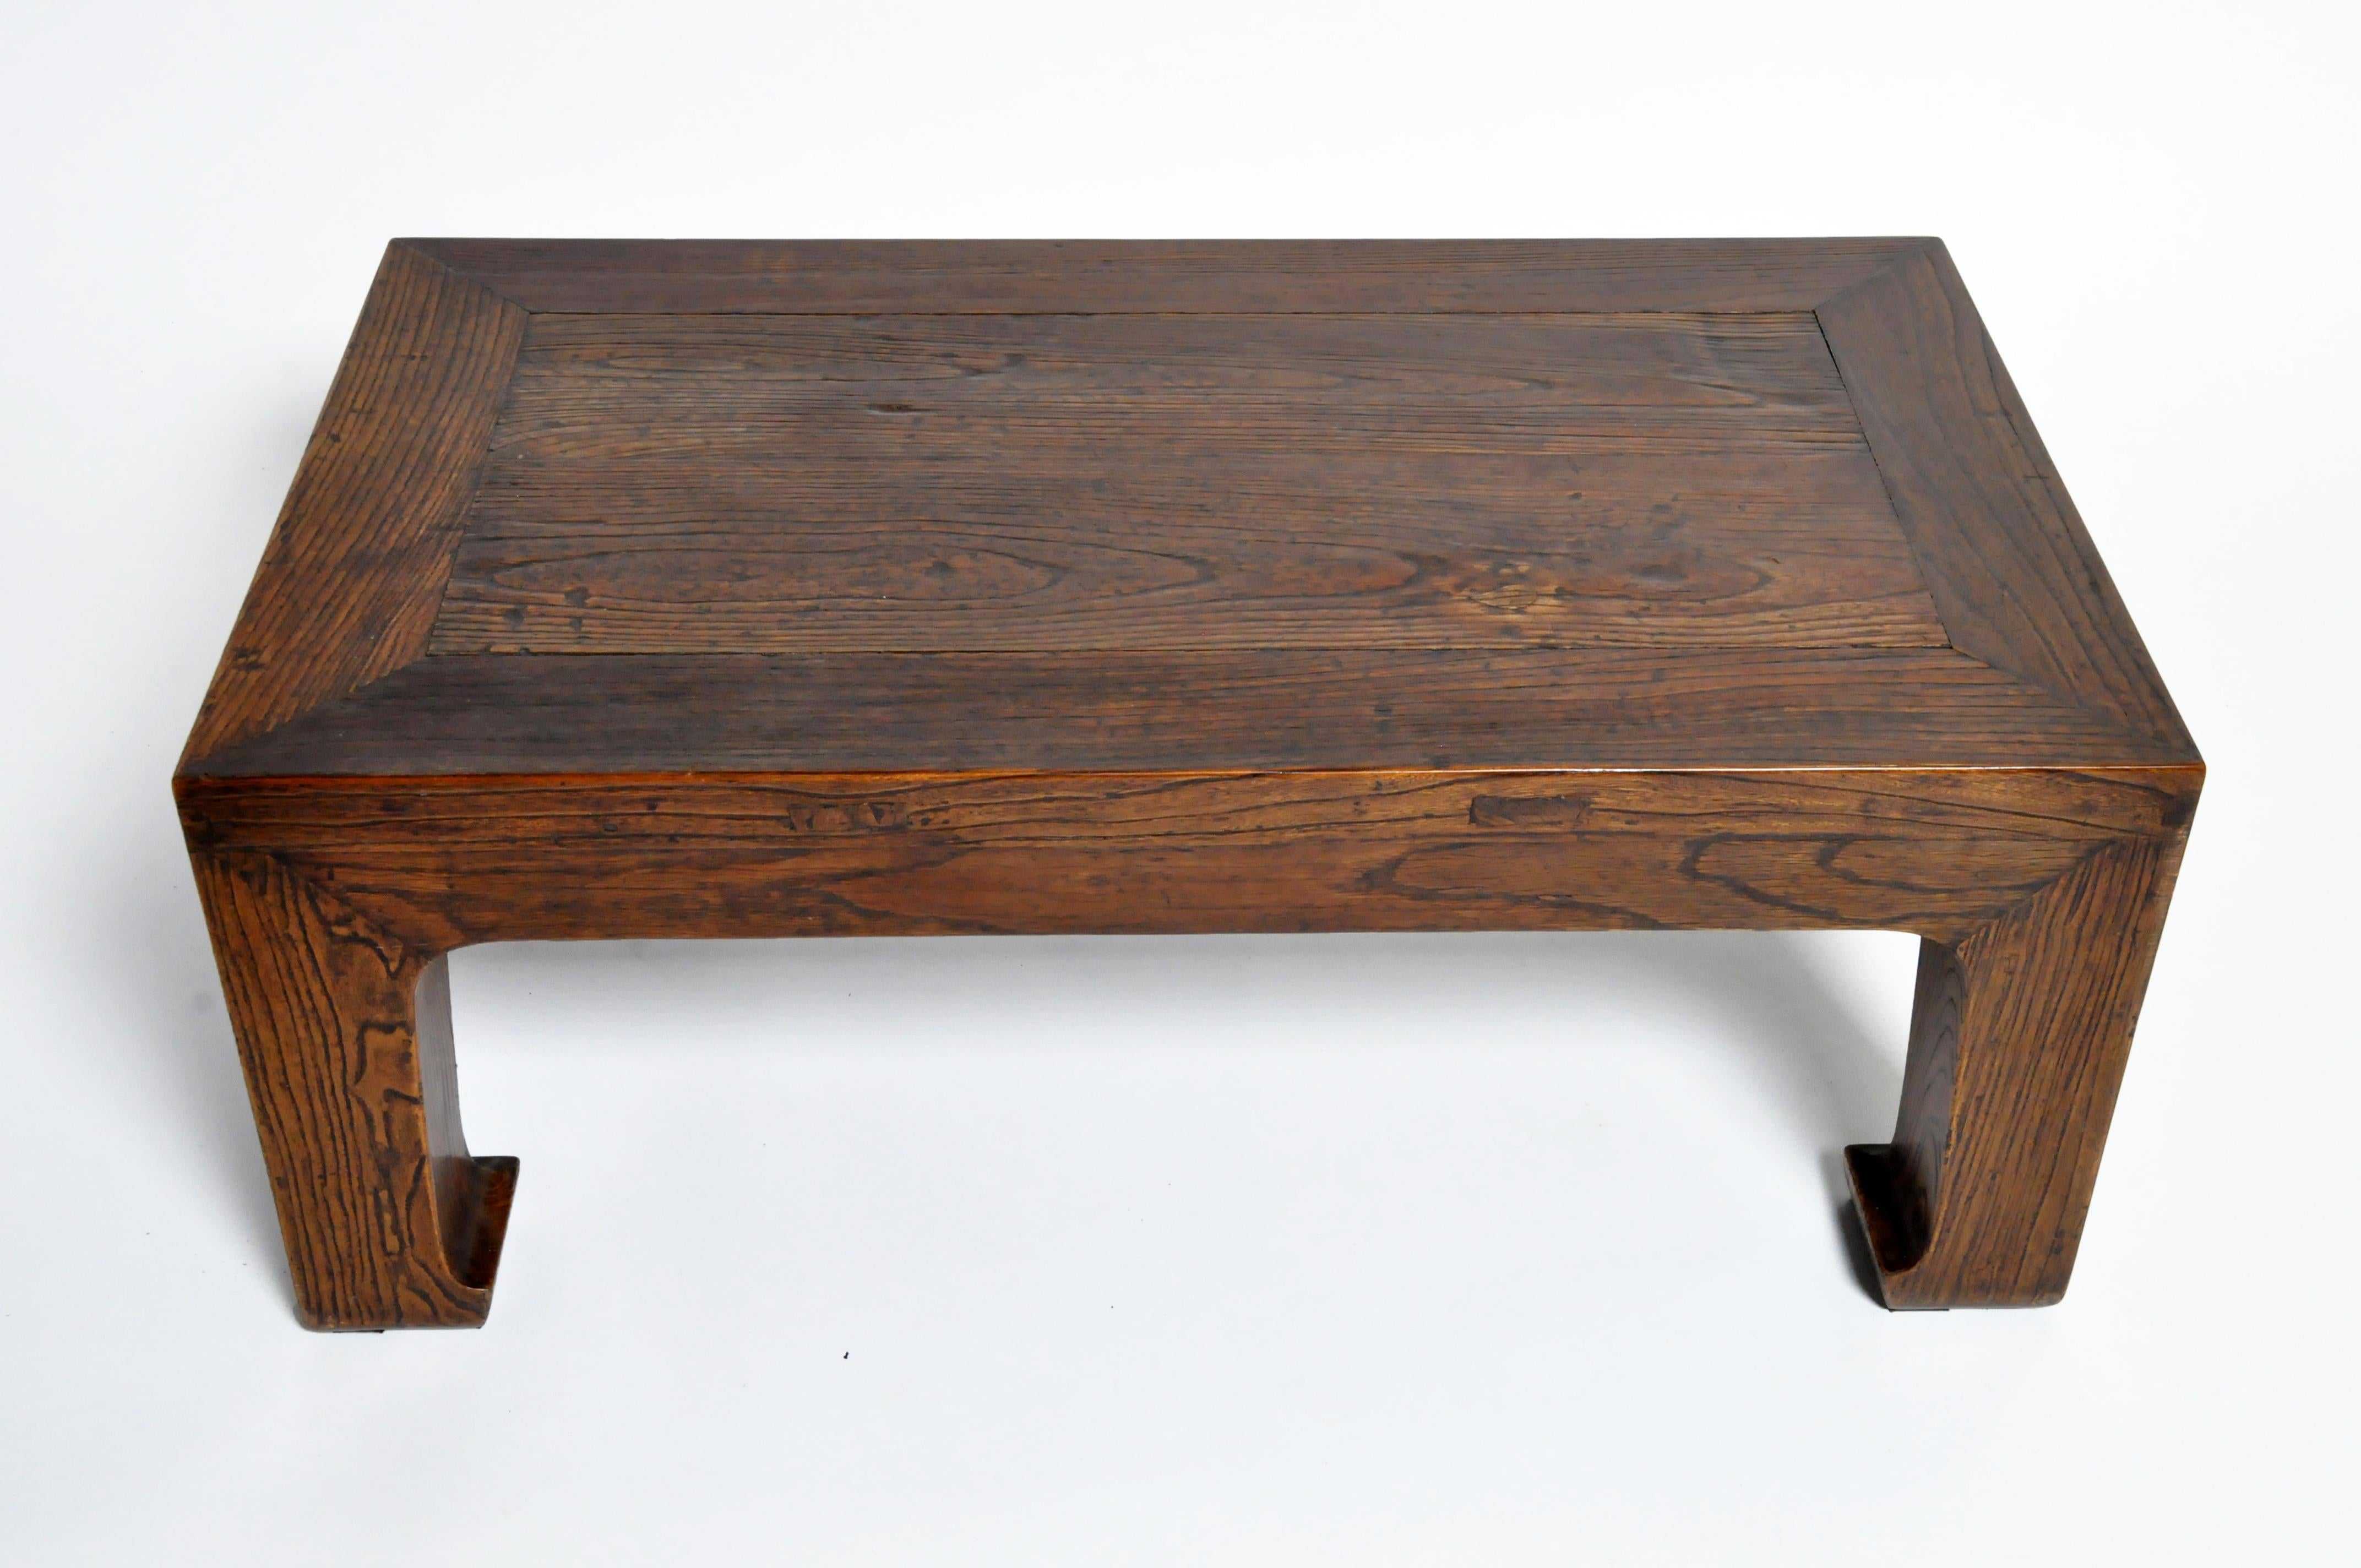 Elm wood coffee table this sturdy coffee table is actually a cut-down Chinese daybed. Elmwood was the preferred furniture wood in Northern China during the 19th century. The large legs (in the Tang horse-hoof style) once supported a much larger top.